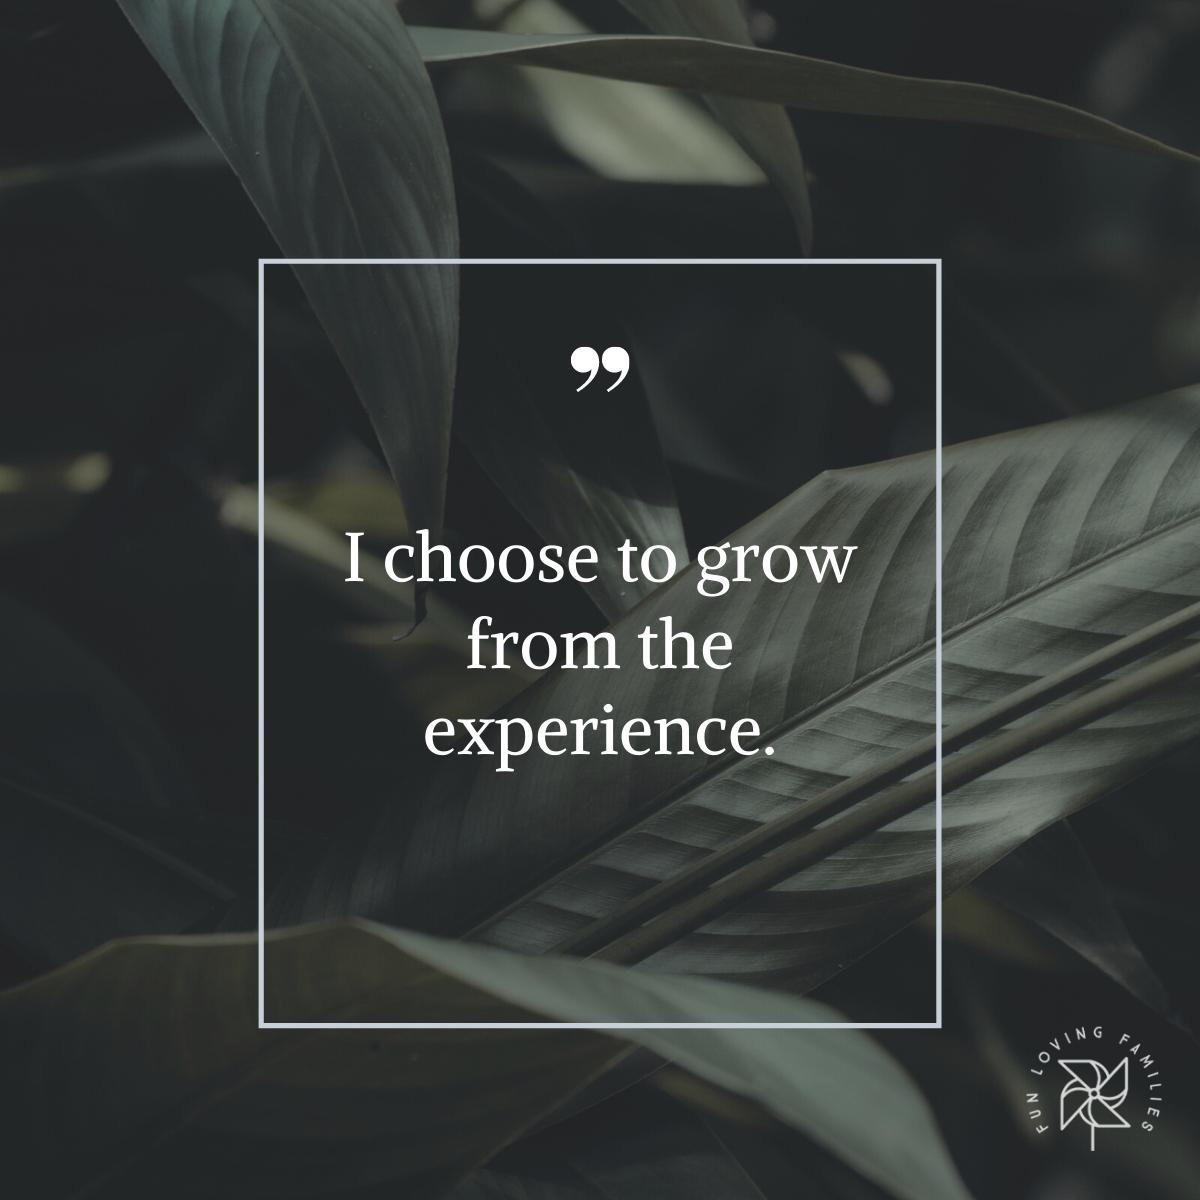 I choose to grow from the experience affirmation image